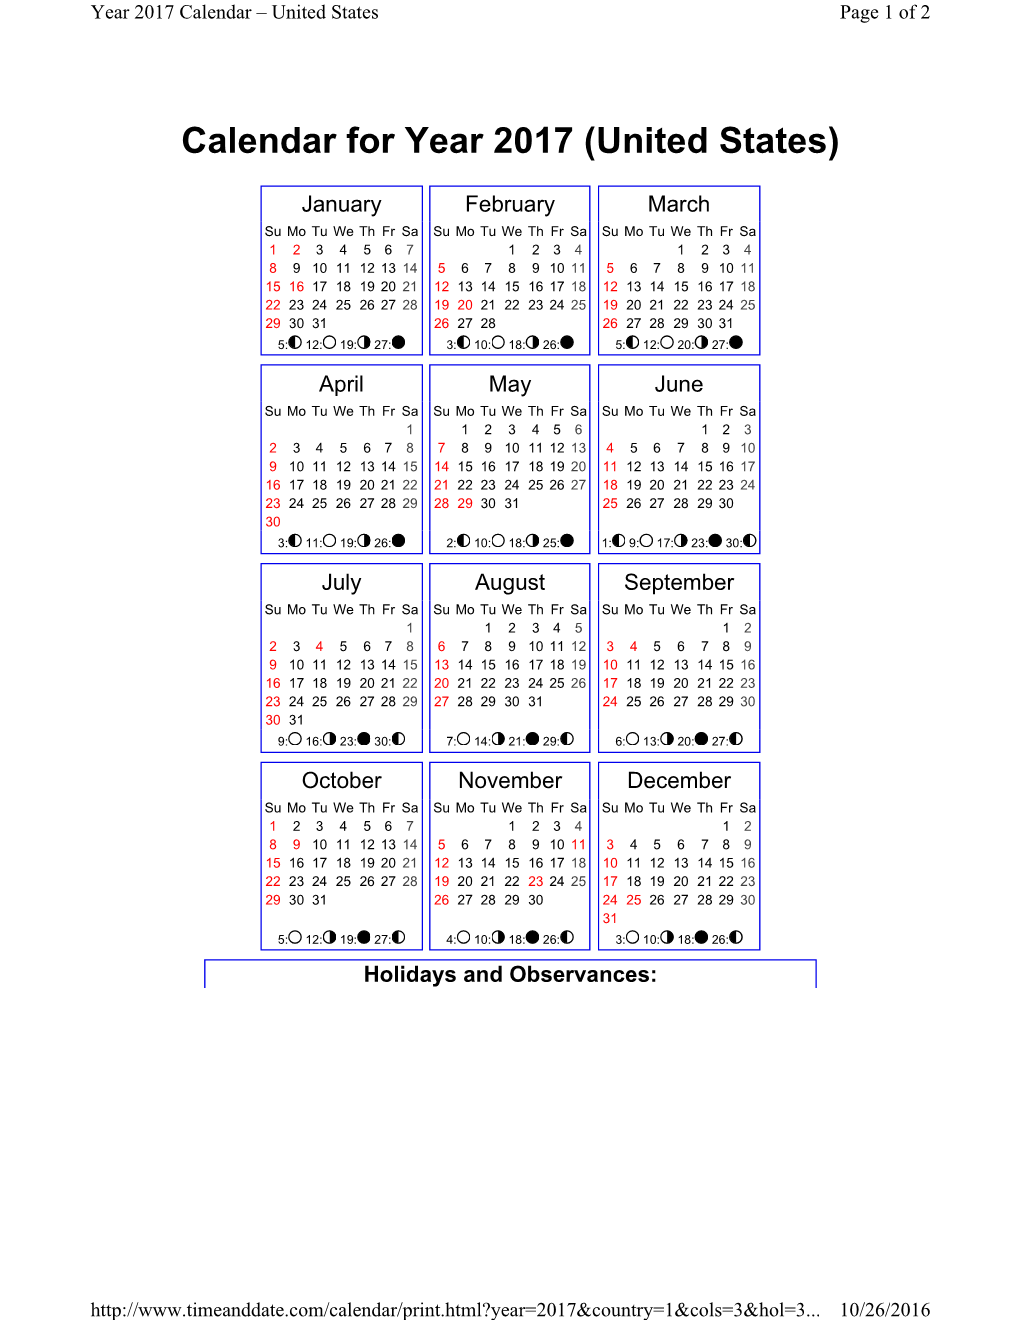 Calendar for Year 2017 (United States)